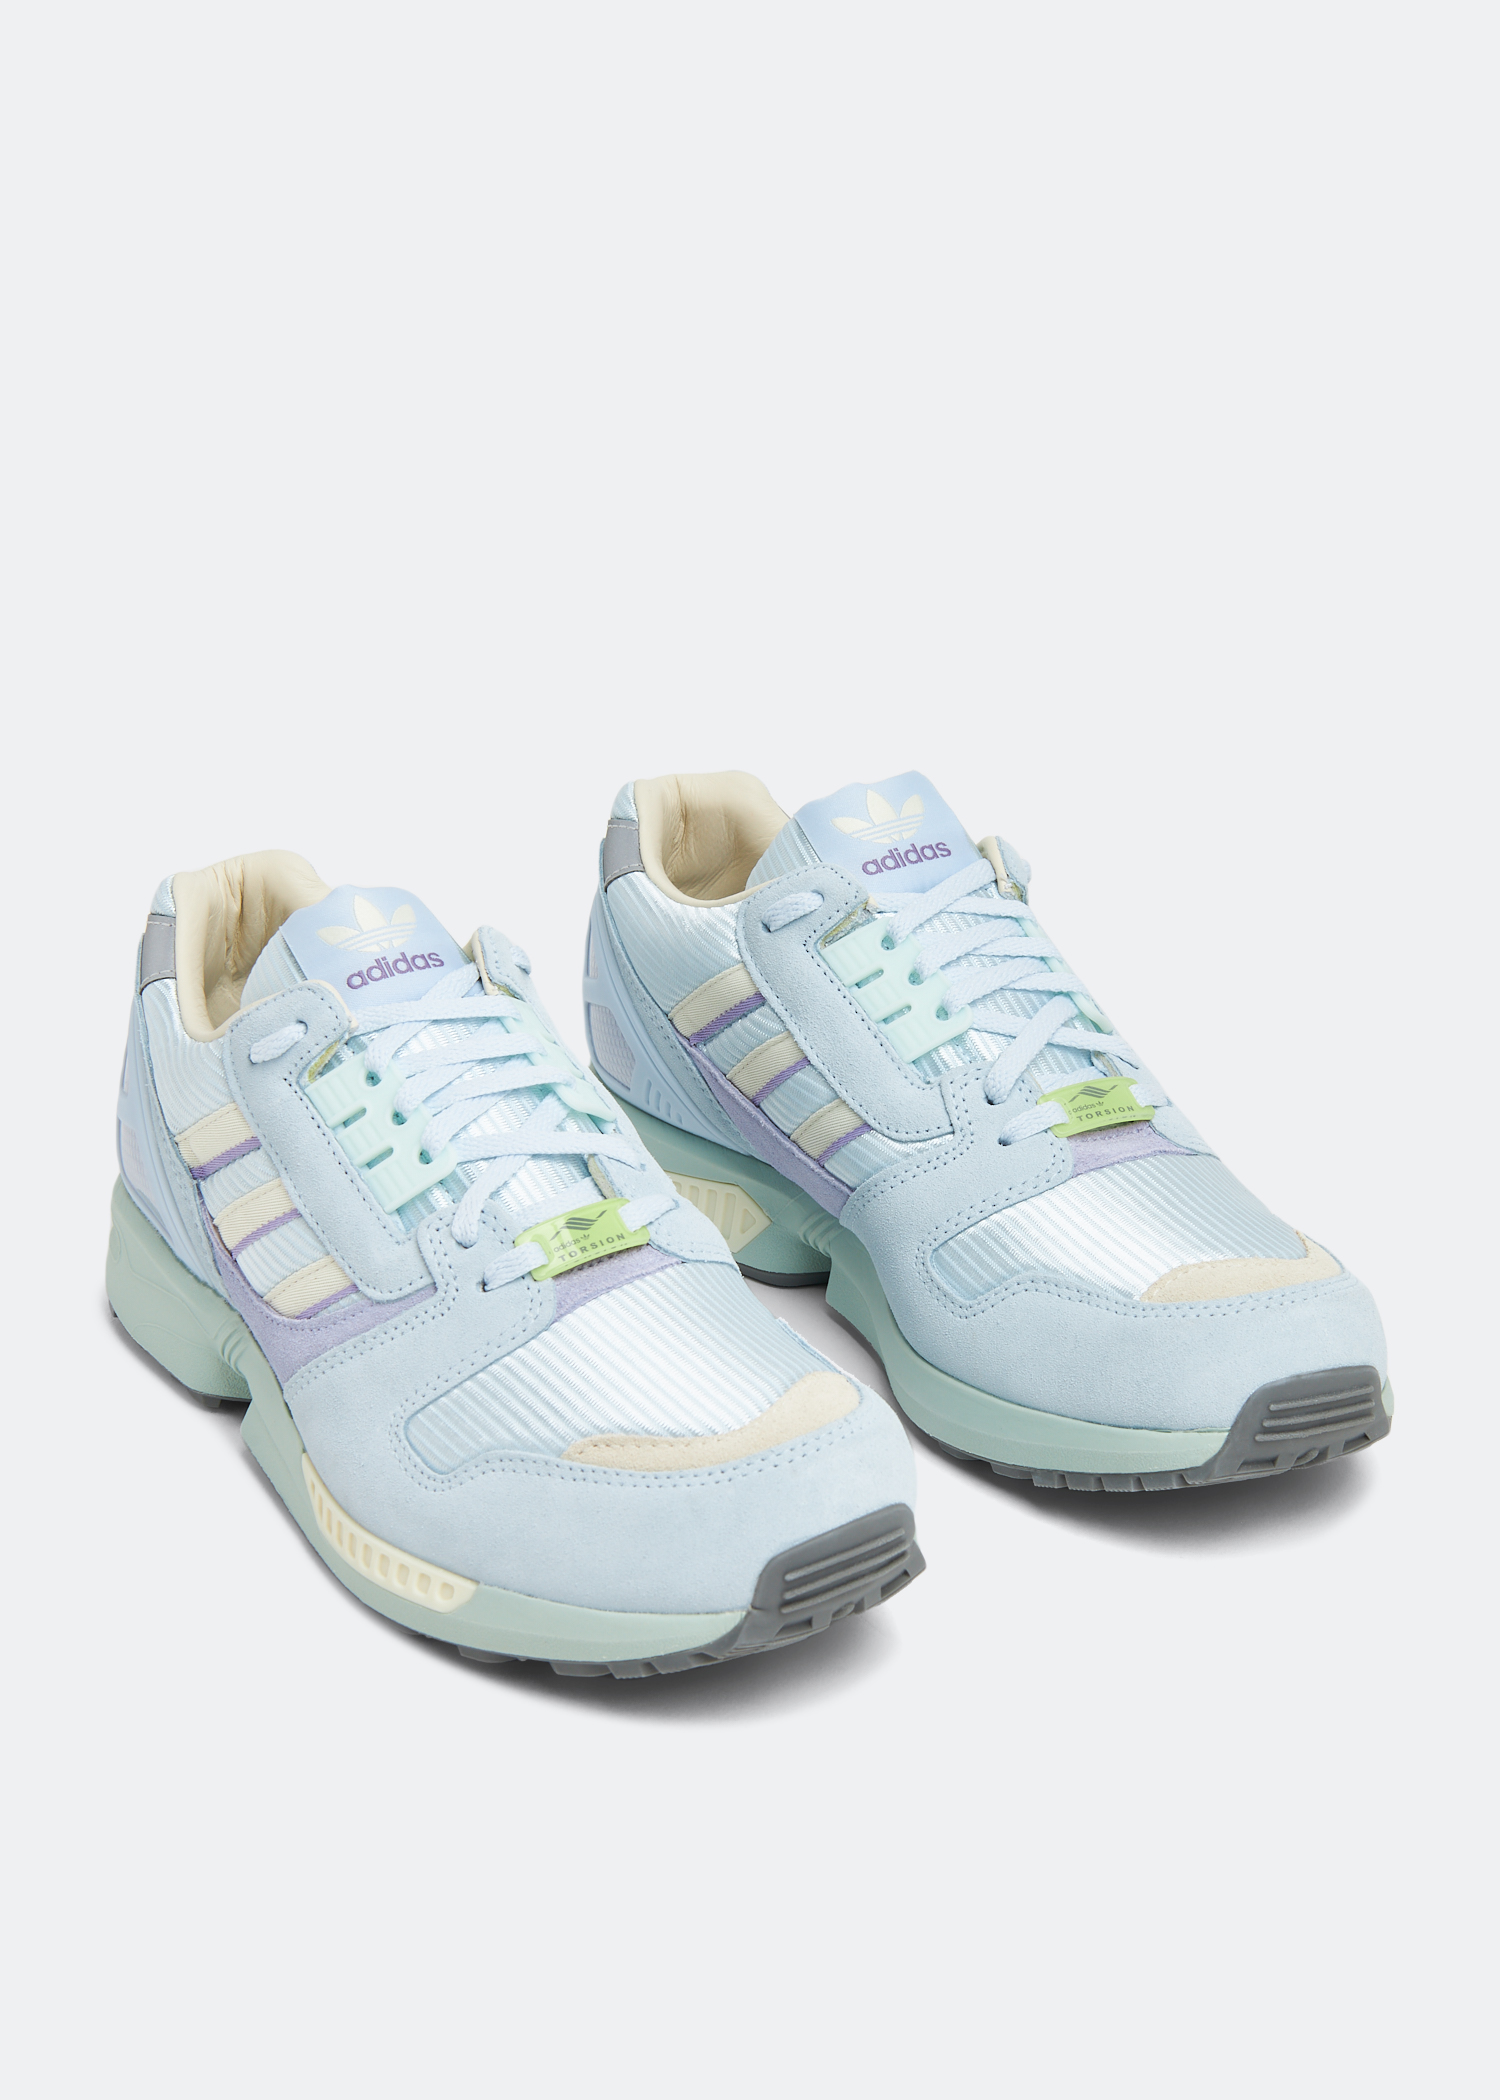 Adidas ZX 8000 sneakers for Men - Blue in KSA | Level Shoes